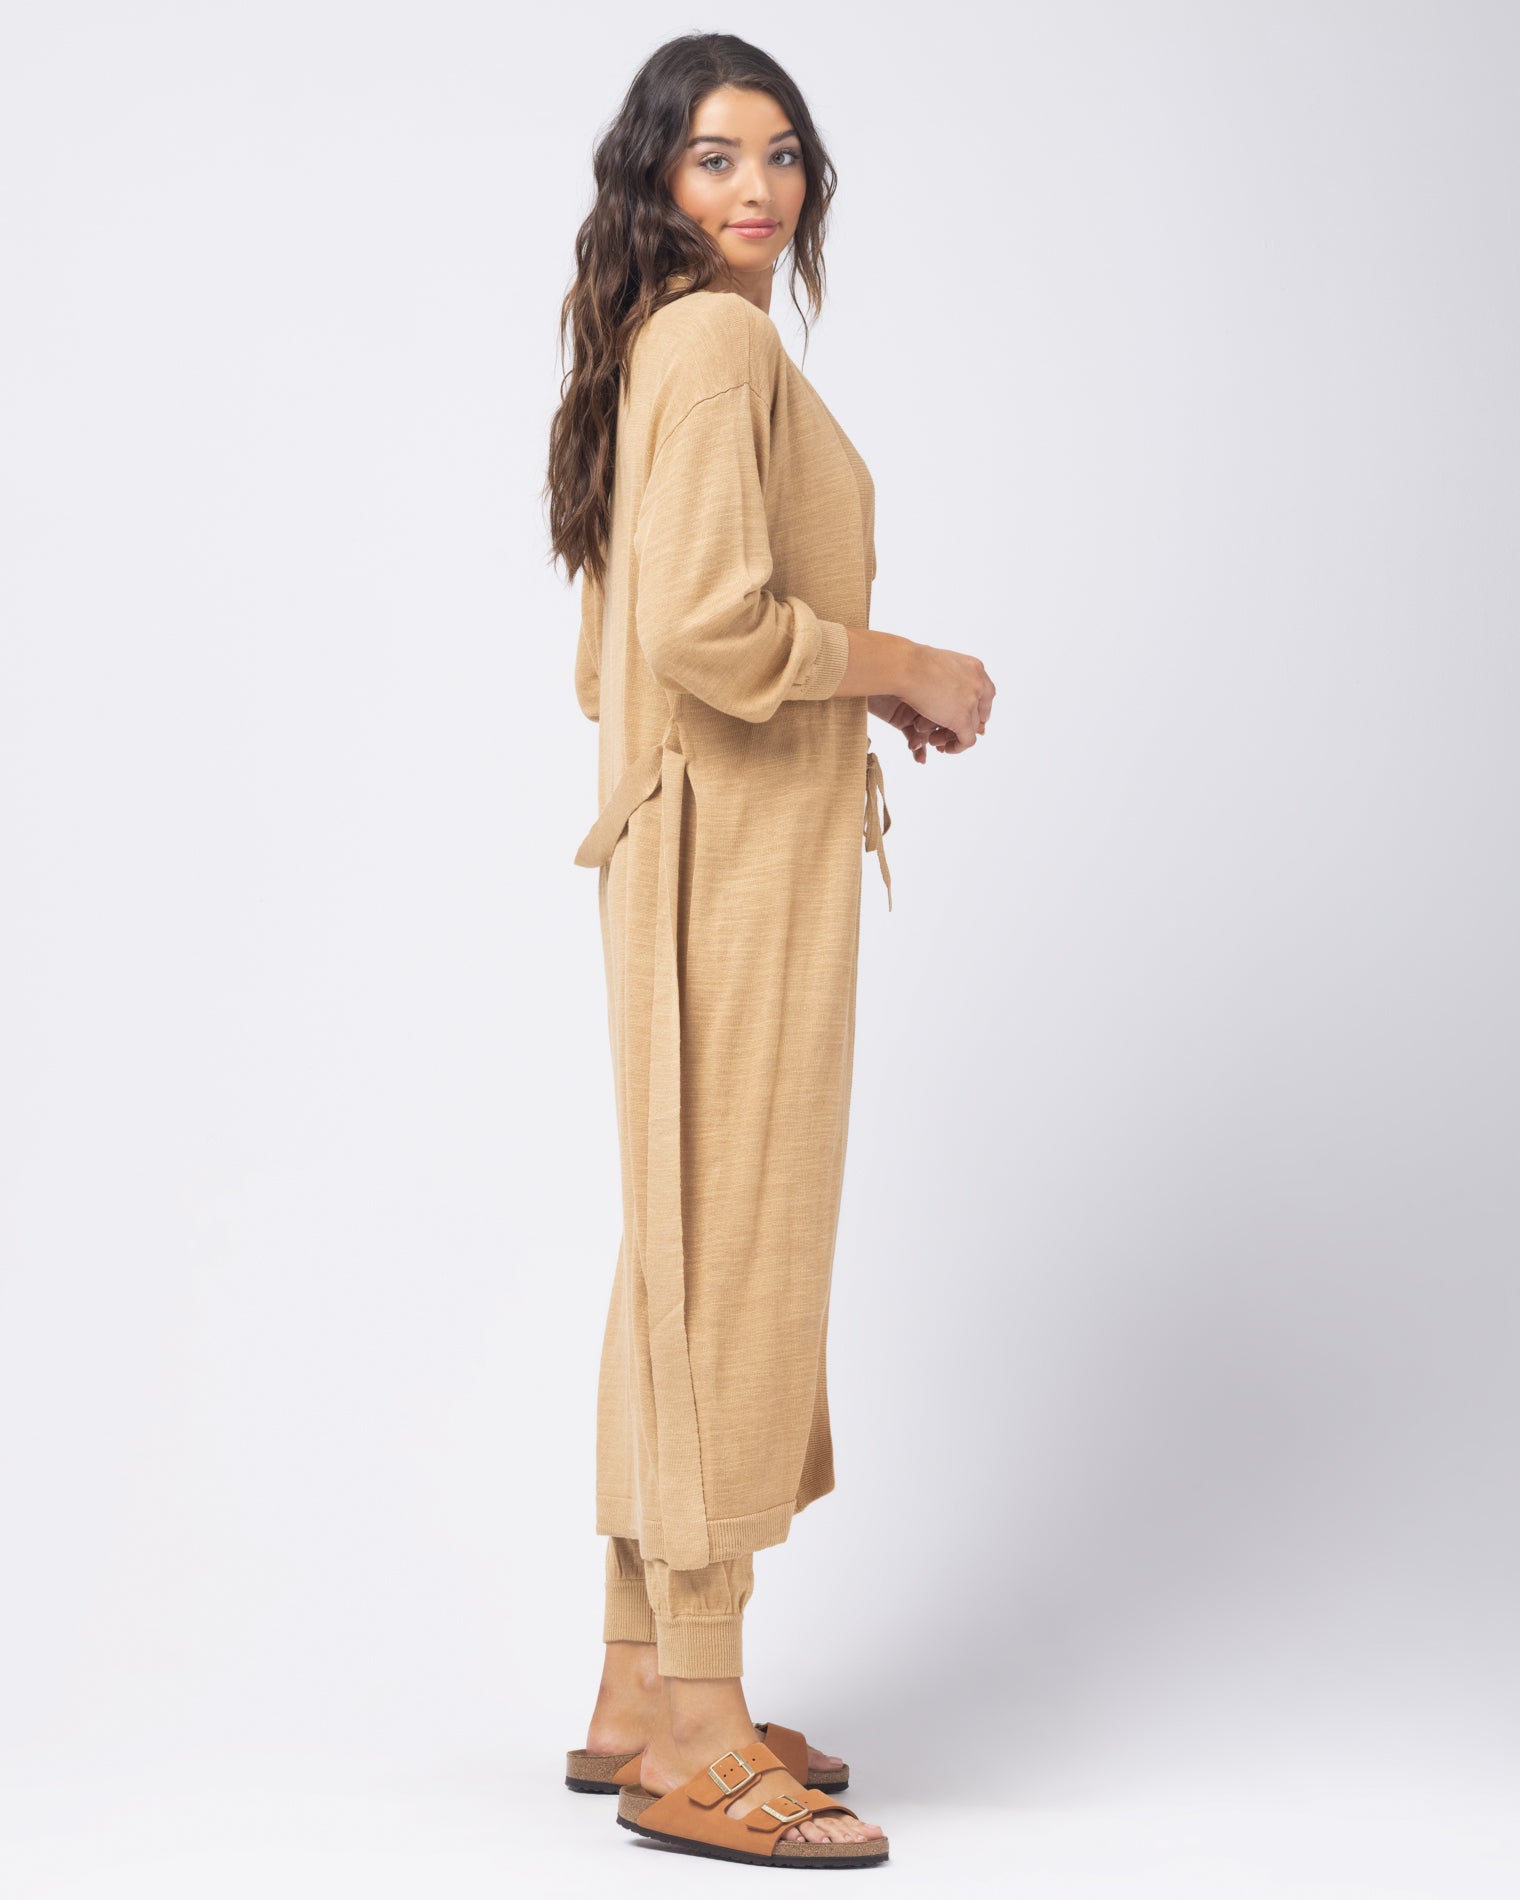 Azores Duster Toffee | Model: Daniela (size: S) | Hover